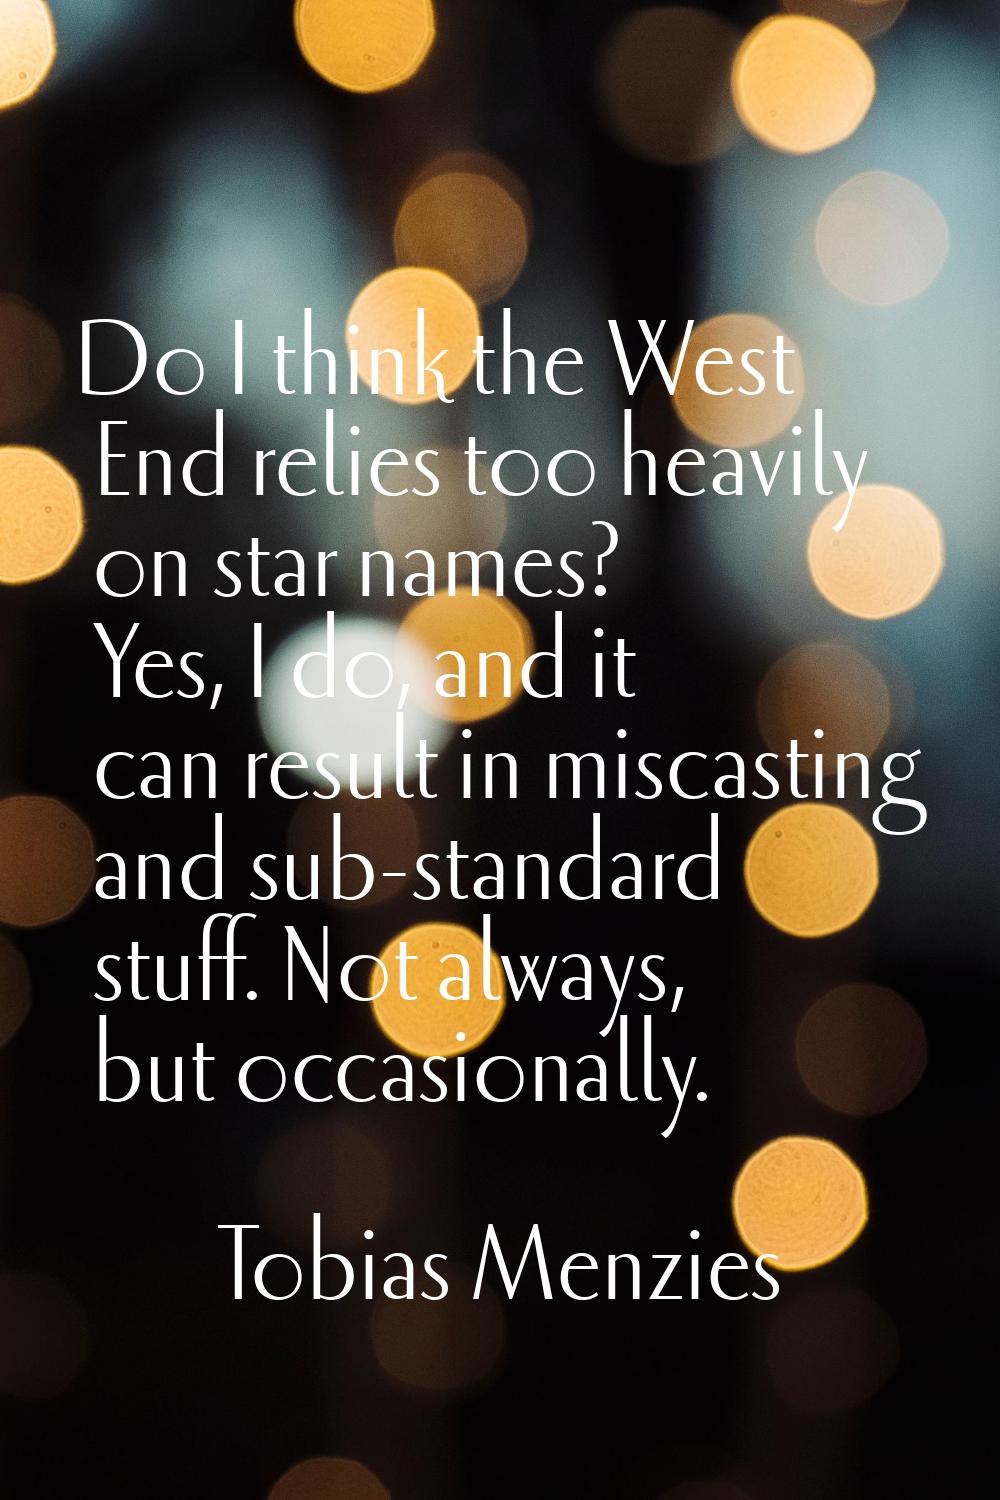 Do I think the West End relies too heavily on star names? Yes, I do, and it can result in miscastin